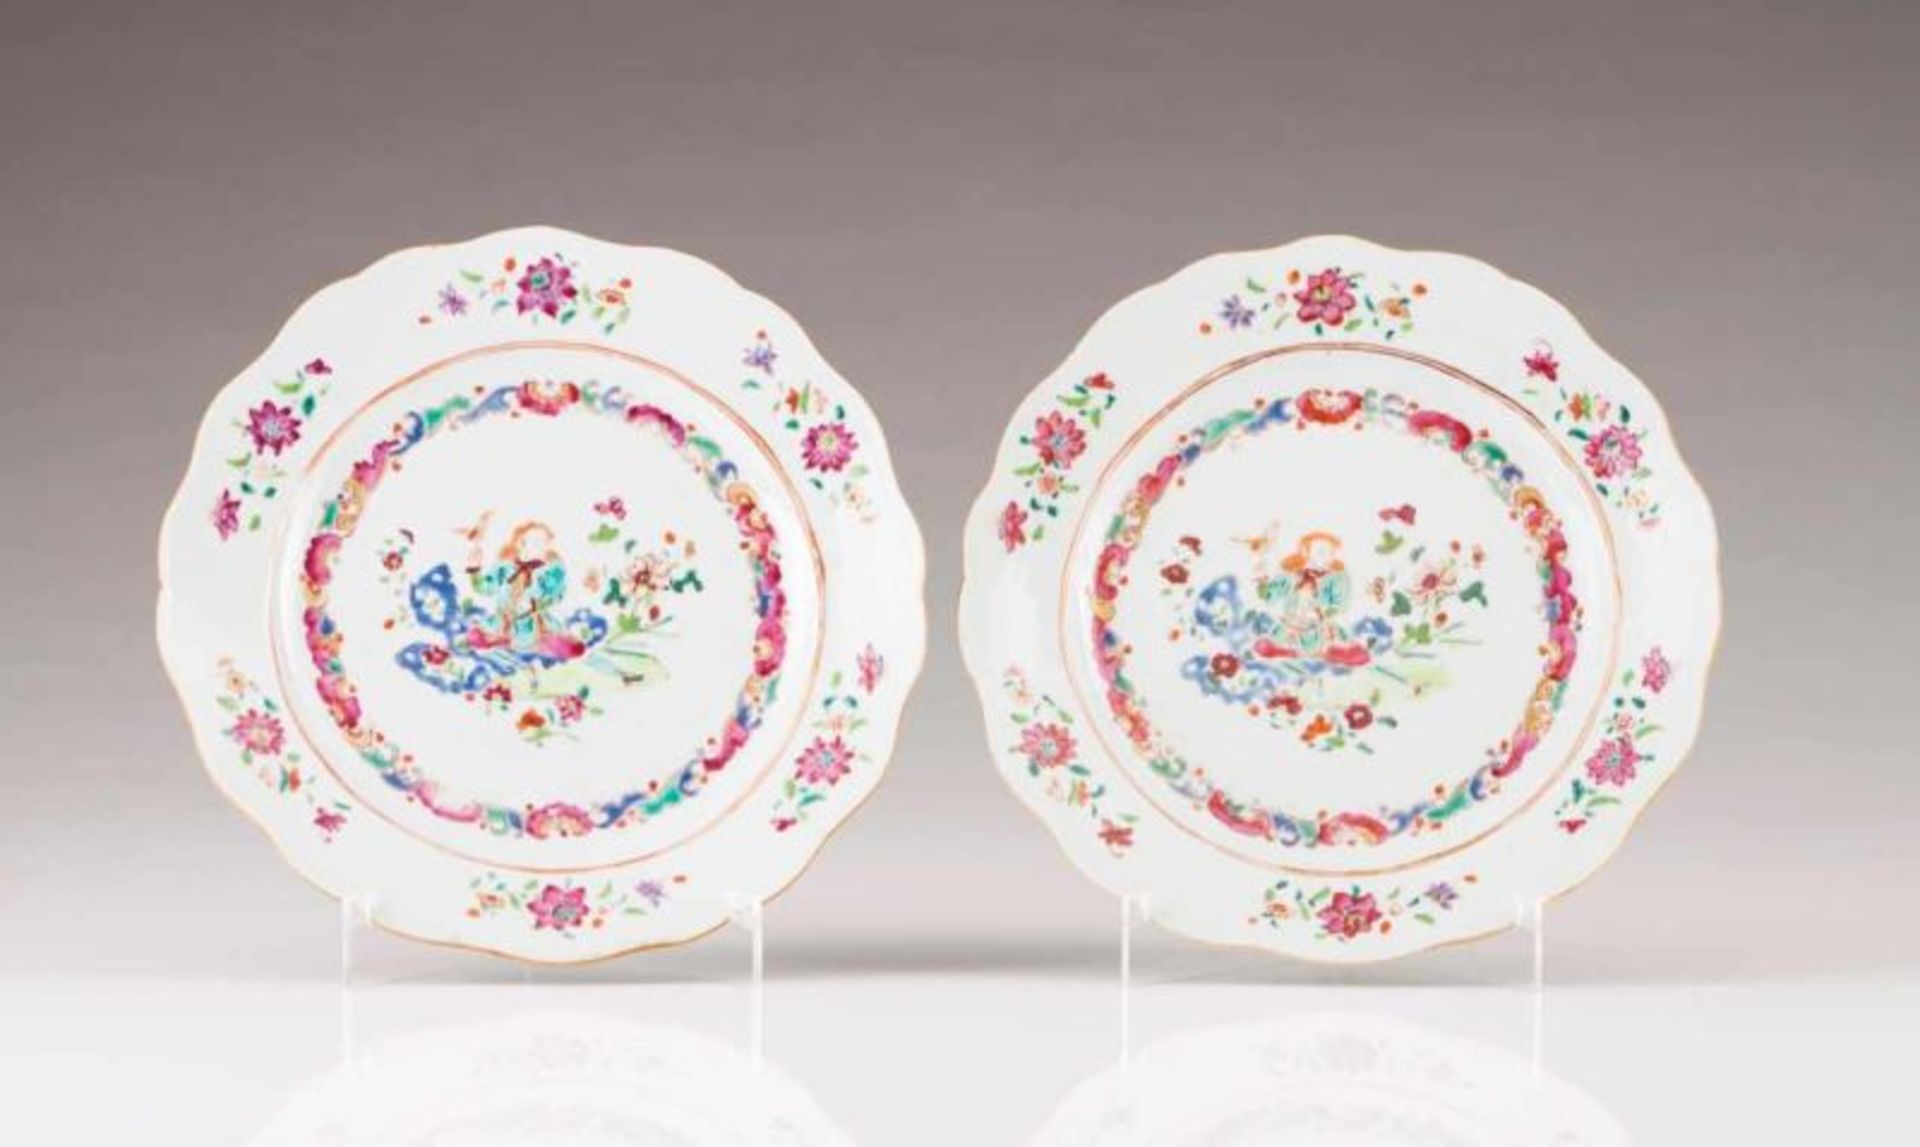 A rare pair of scalloped plates Chinese export porcelain Polychrome and gilt decoration depicting